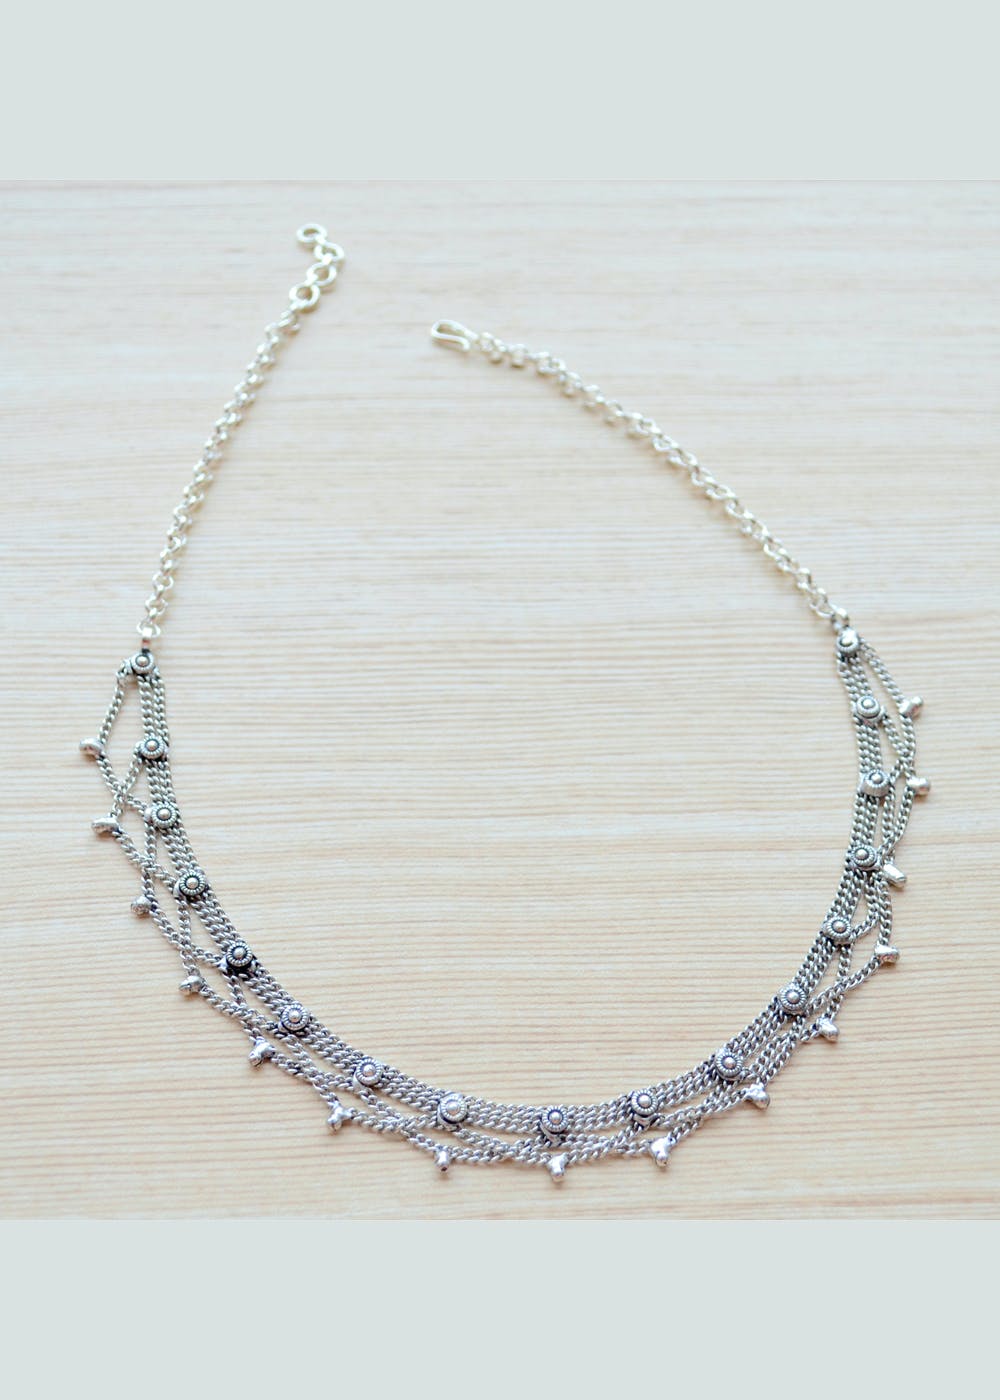 Gothic Name Choker Necklace in Sterling Silver - MYKA